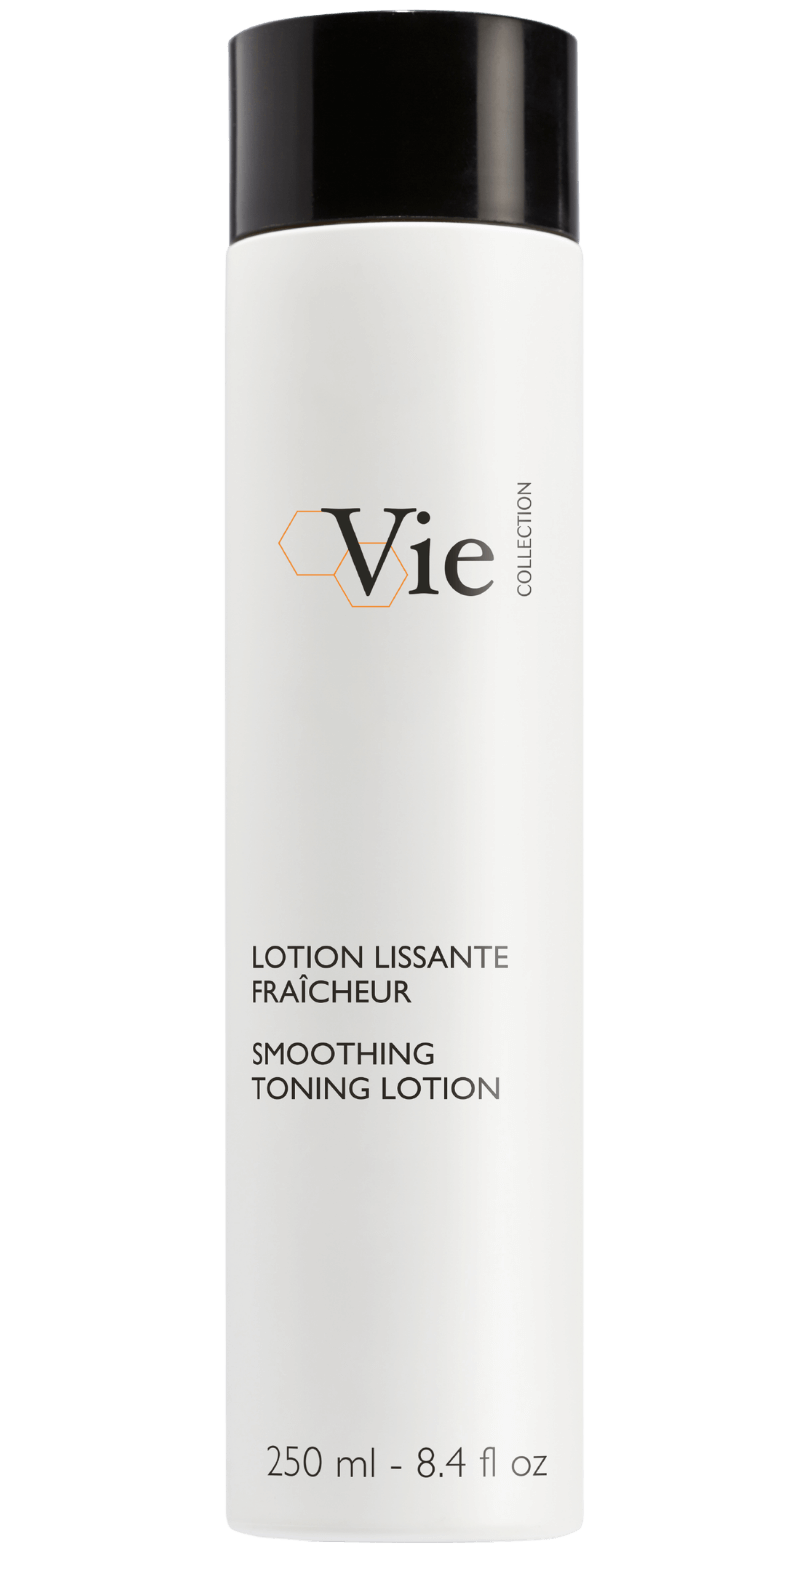 's Vie Smoothing Toning Lotion - Bellini's Skin and Parfumerie 